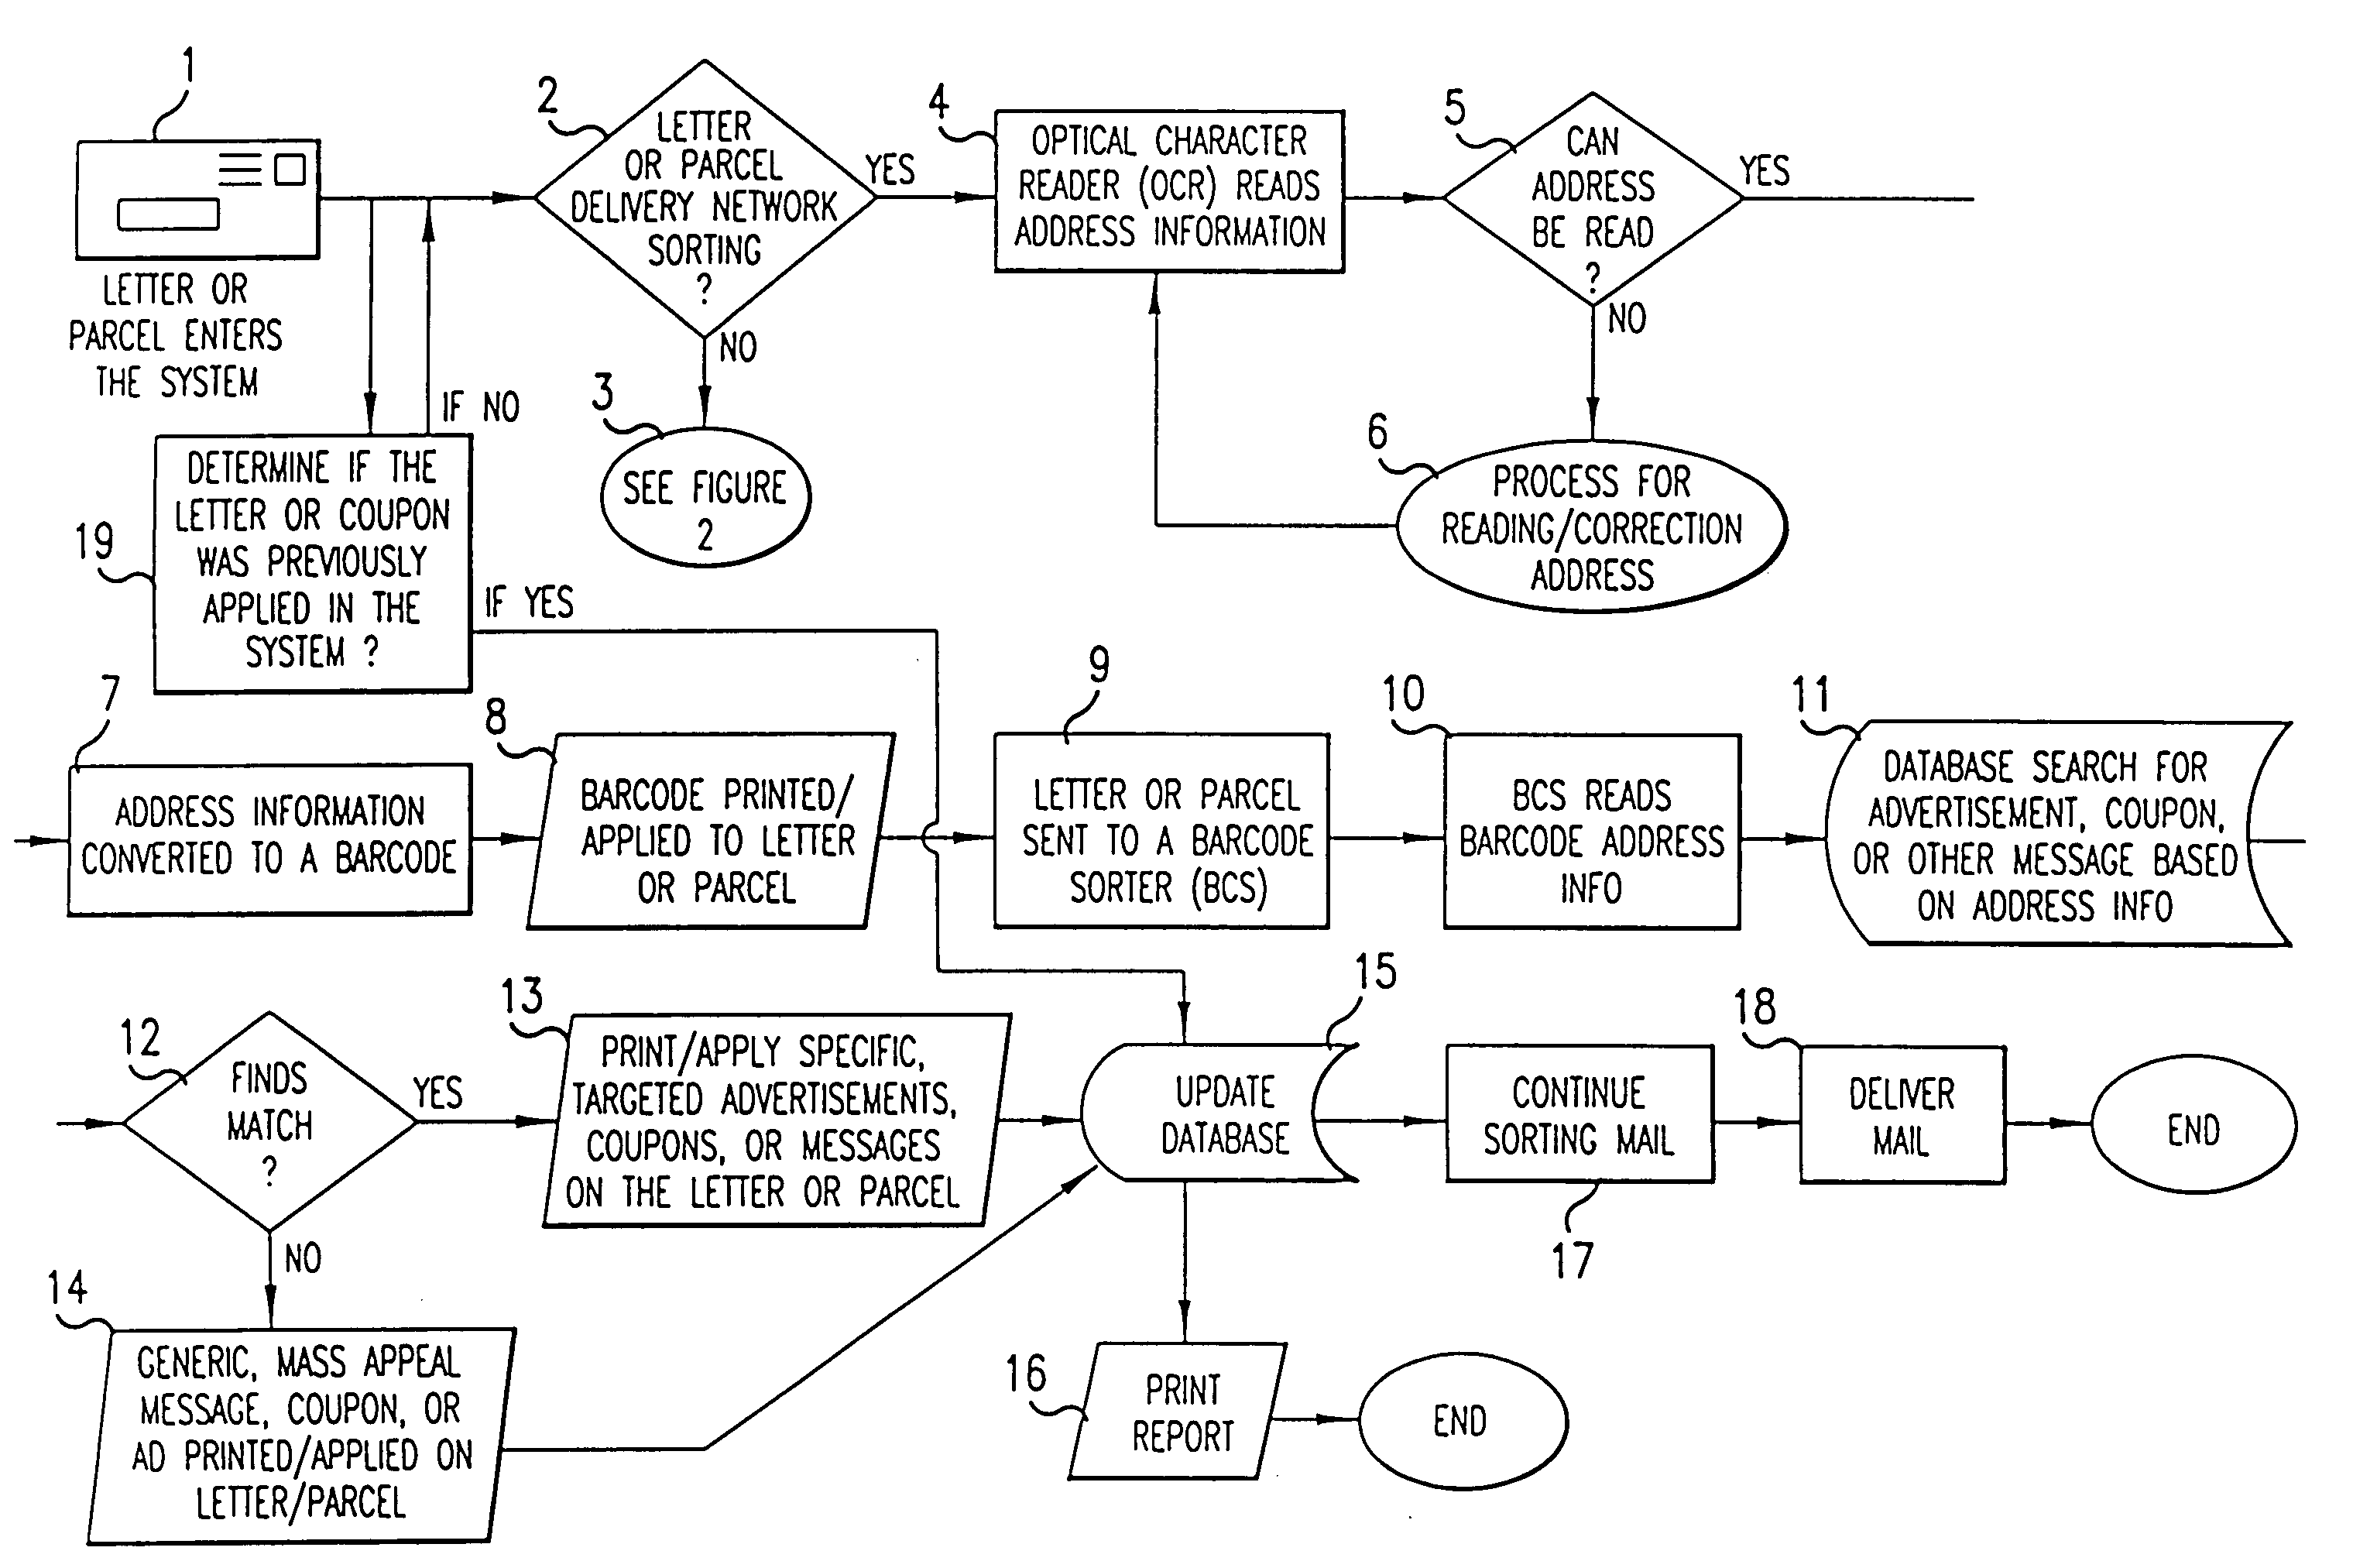 Interactive process for applying or printing information on letters or parcels